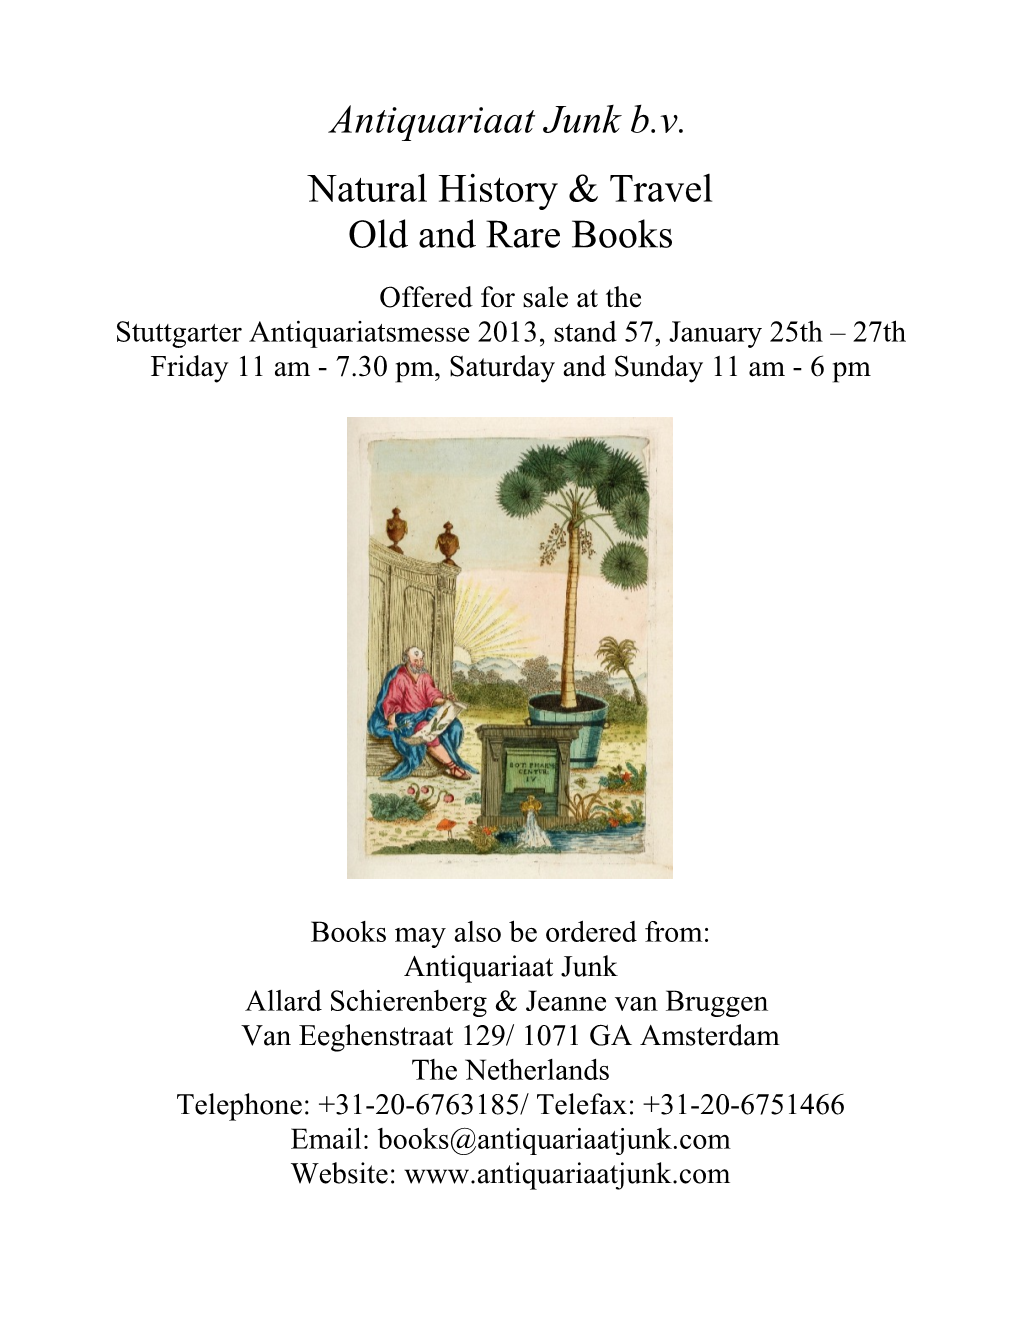 Antiquariaat Junk B.V. Natural History & Travel Old and Rare Books